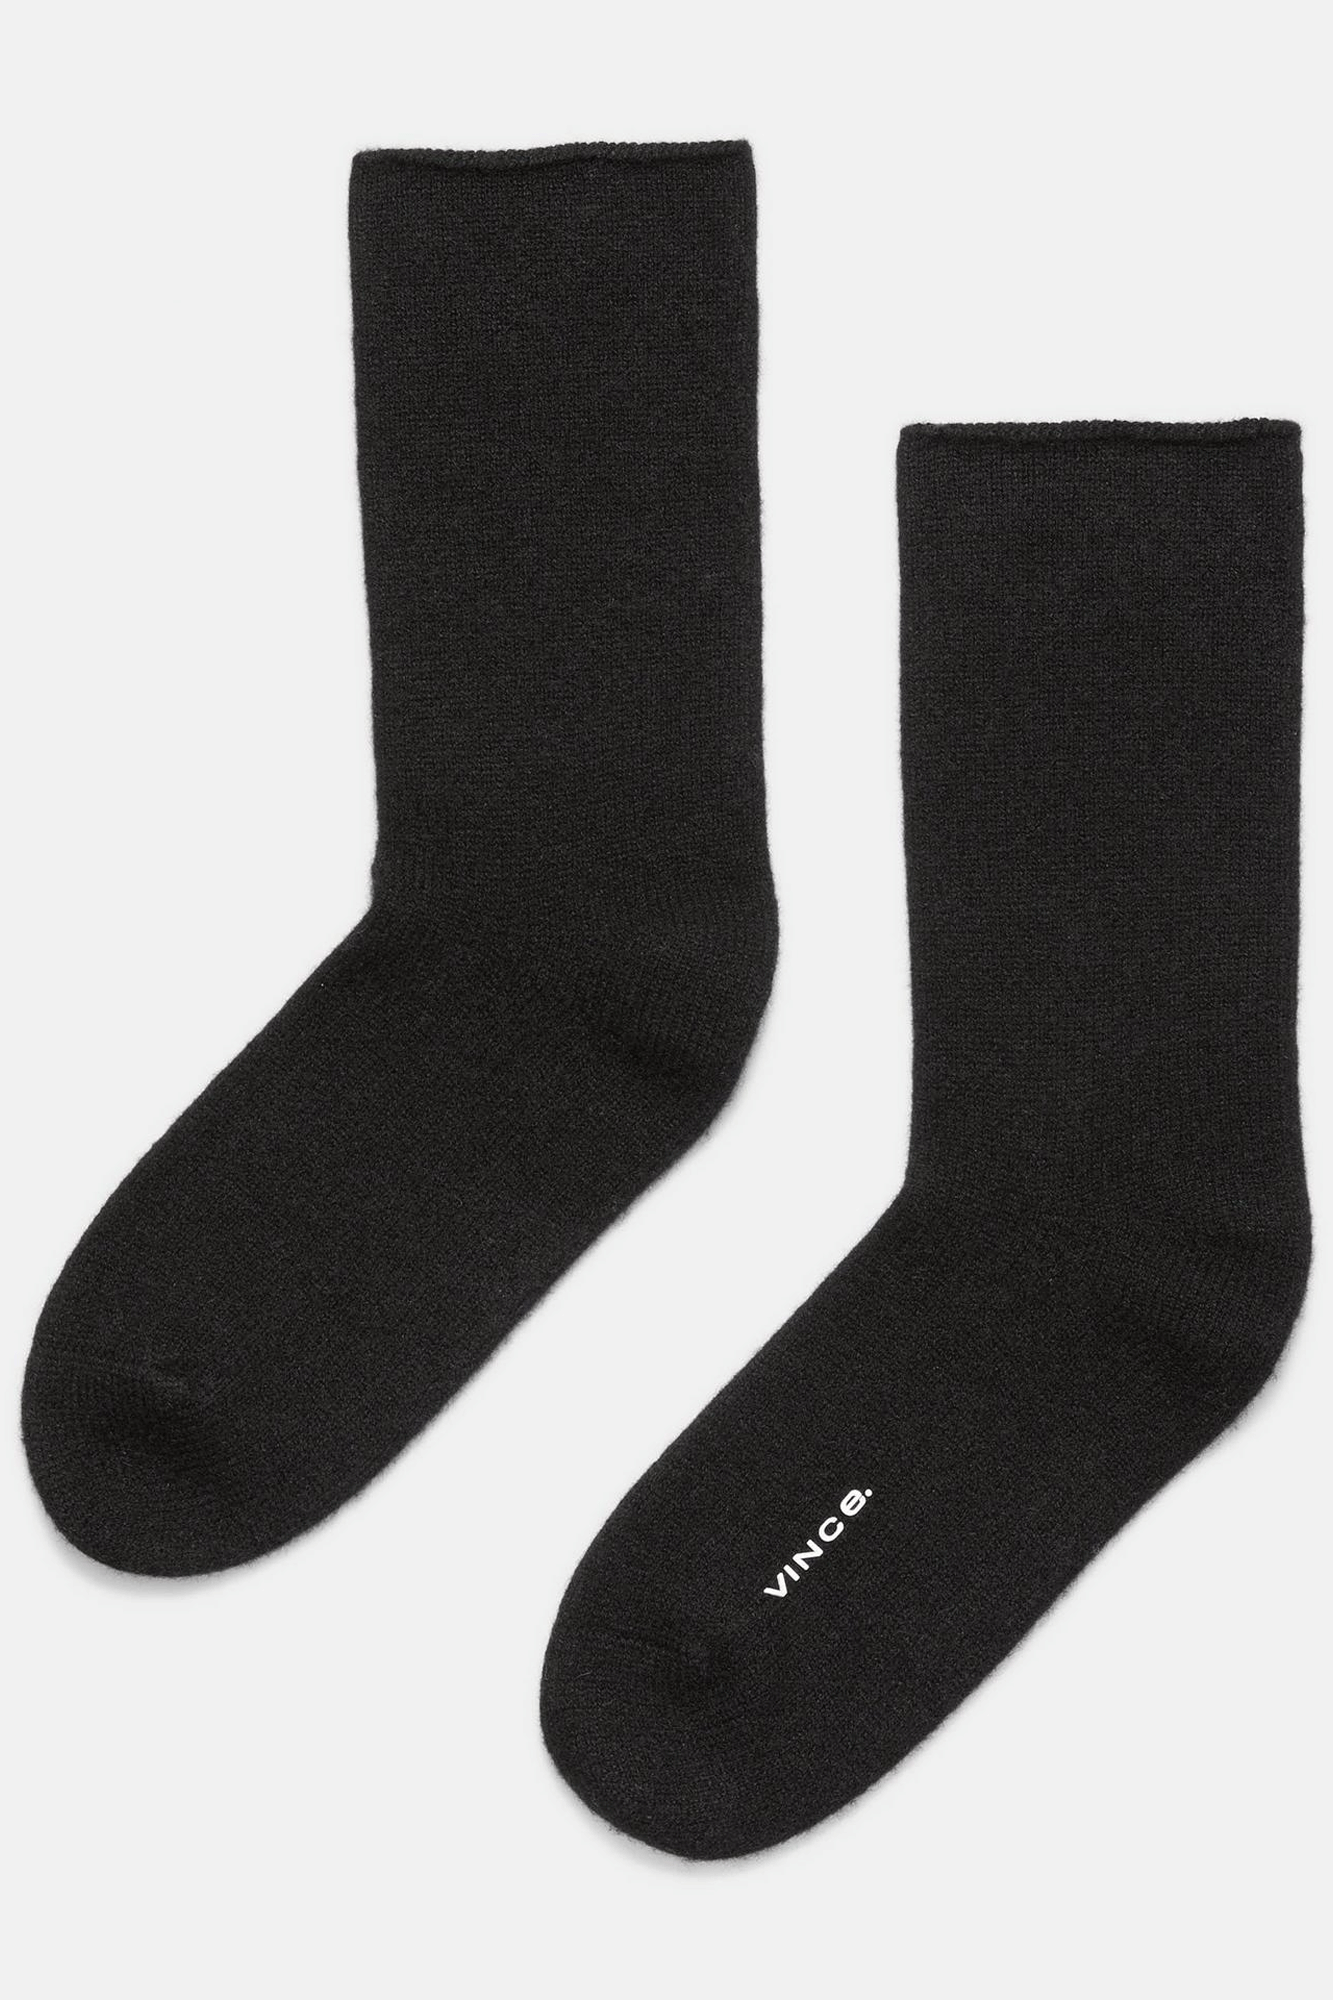 Experience the warmth and softness of cashmere on the coldest days with the Cashmere Jersey Short Sock from Vince. They are perfect for keeping your feet comfortable and indulged in natural luxury.